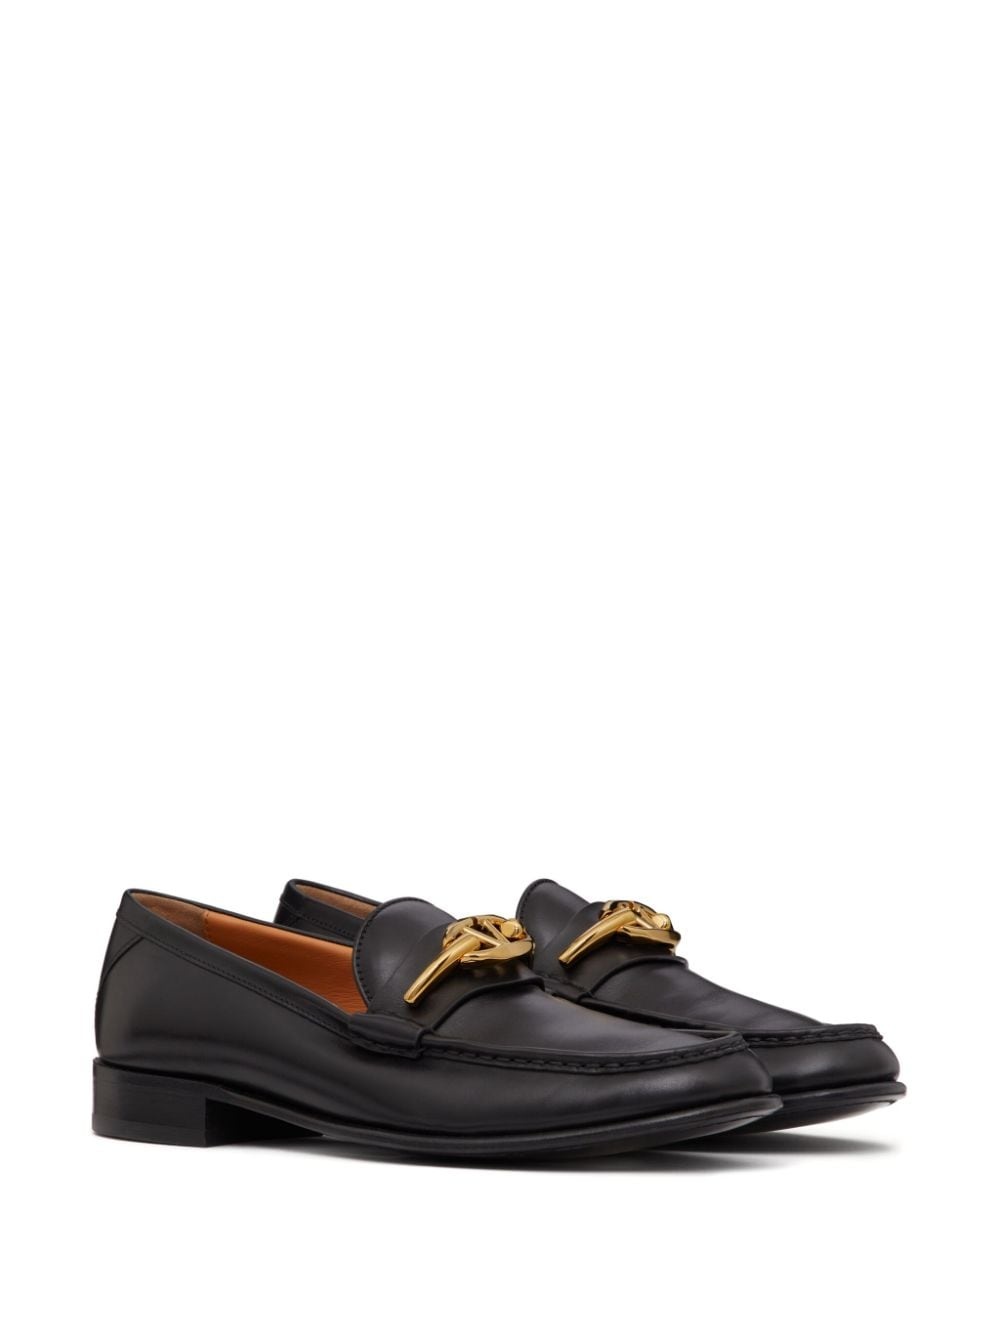 VLogo Moon leather loafers - 2